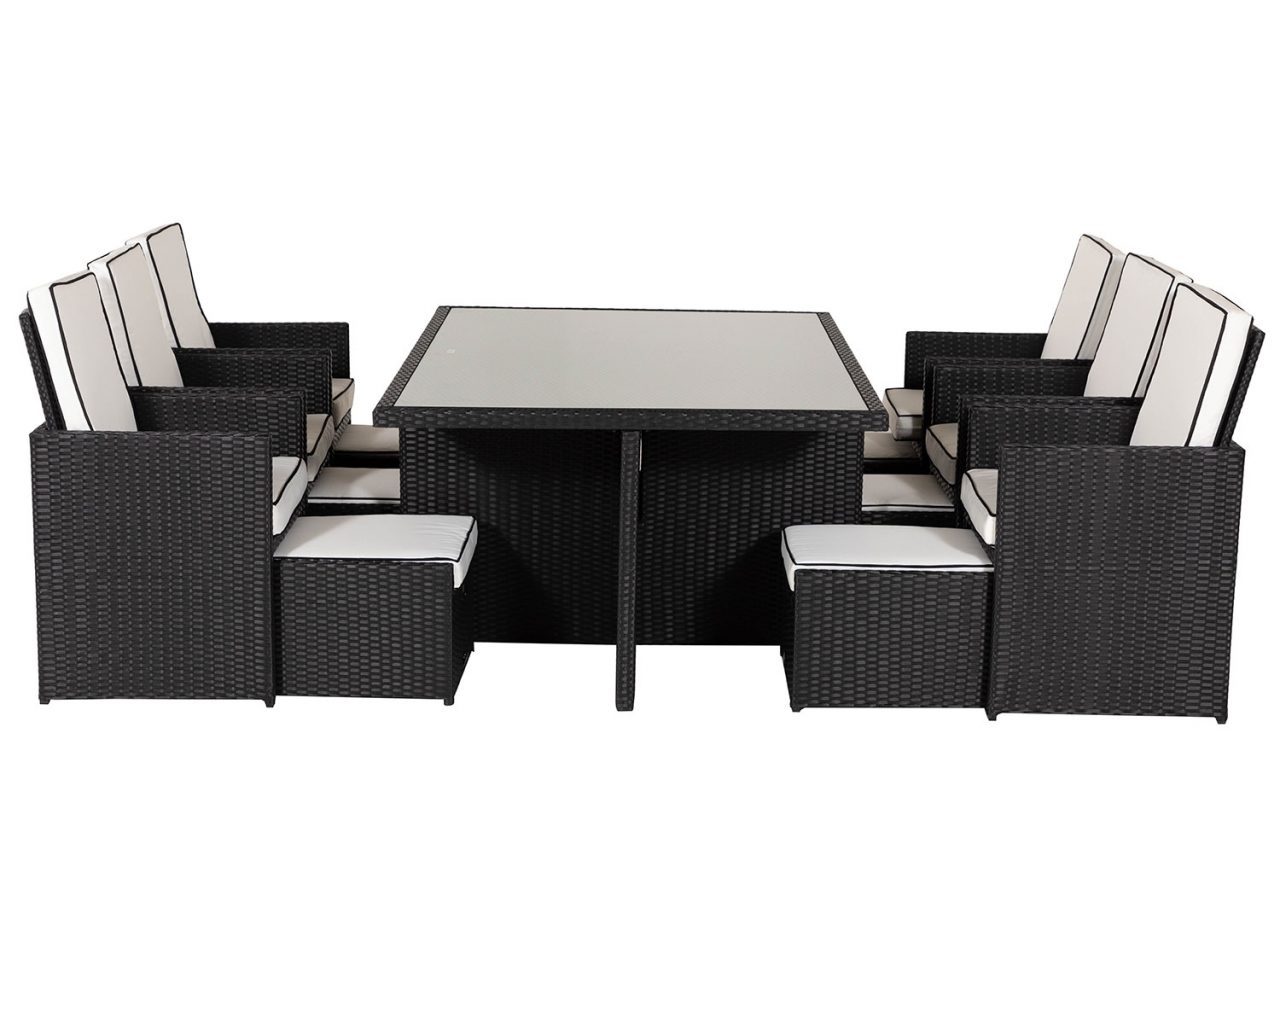 6 Seat Rattan Garden Cube Dining Set in Black with Footstools